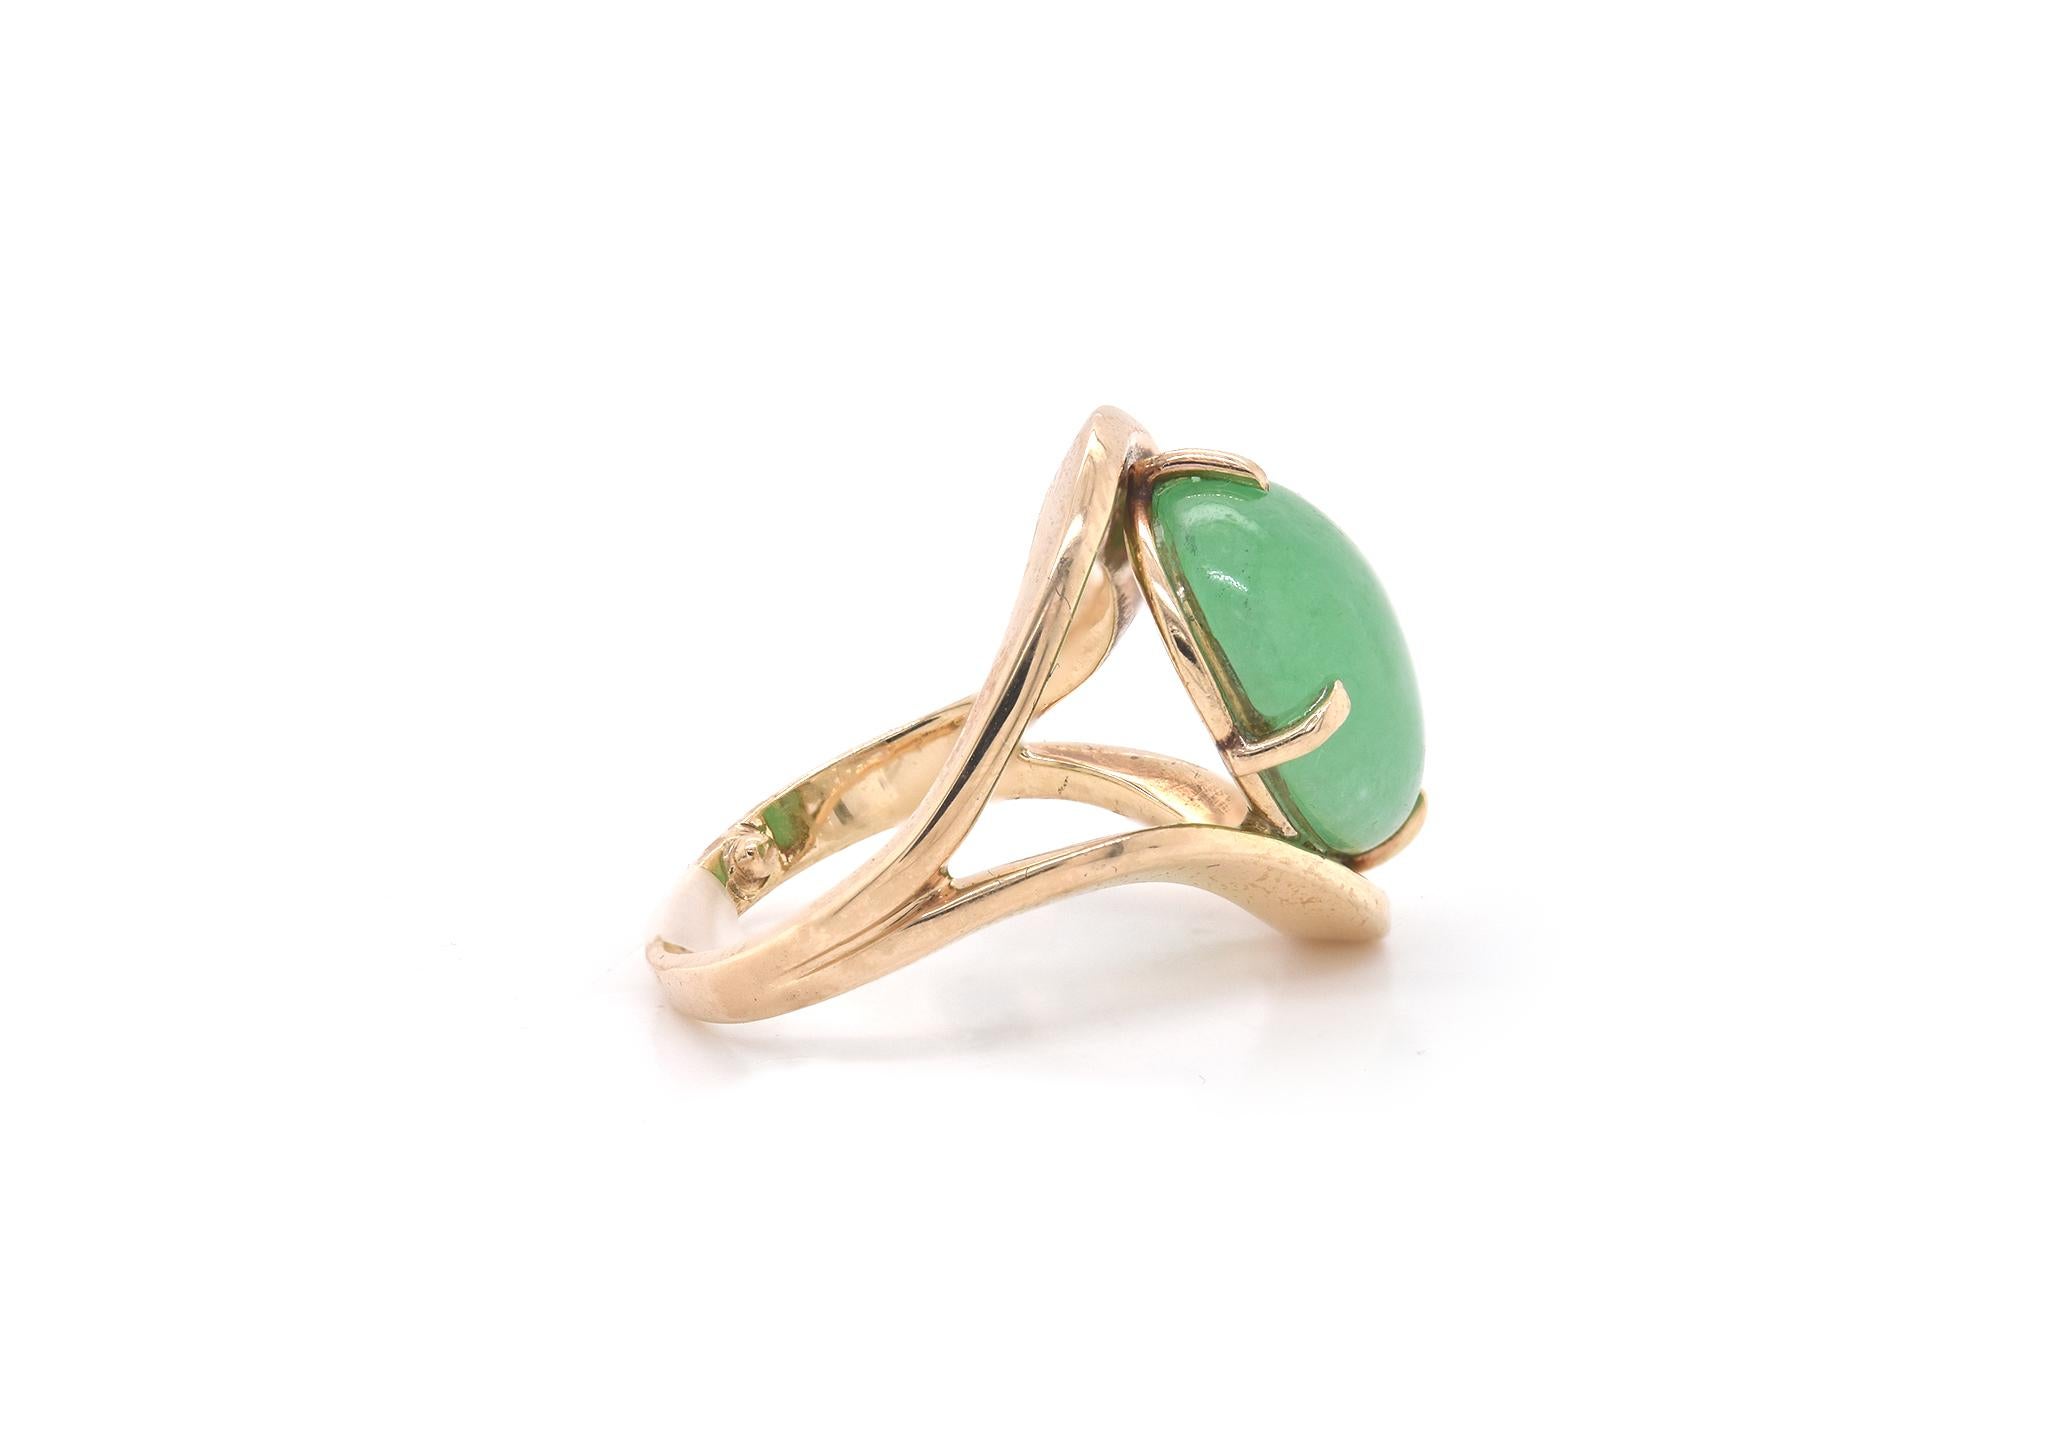 Material: 14k yellow gold
Gemstone: 1 oval cabochon cut jade
Ring Size: 5 ¾ (allow up to two additional business days for sizing requests)
Weight: 7.5 grams
